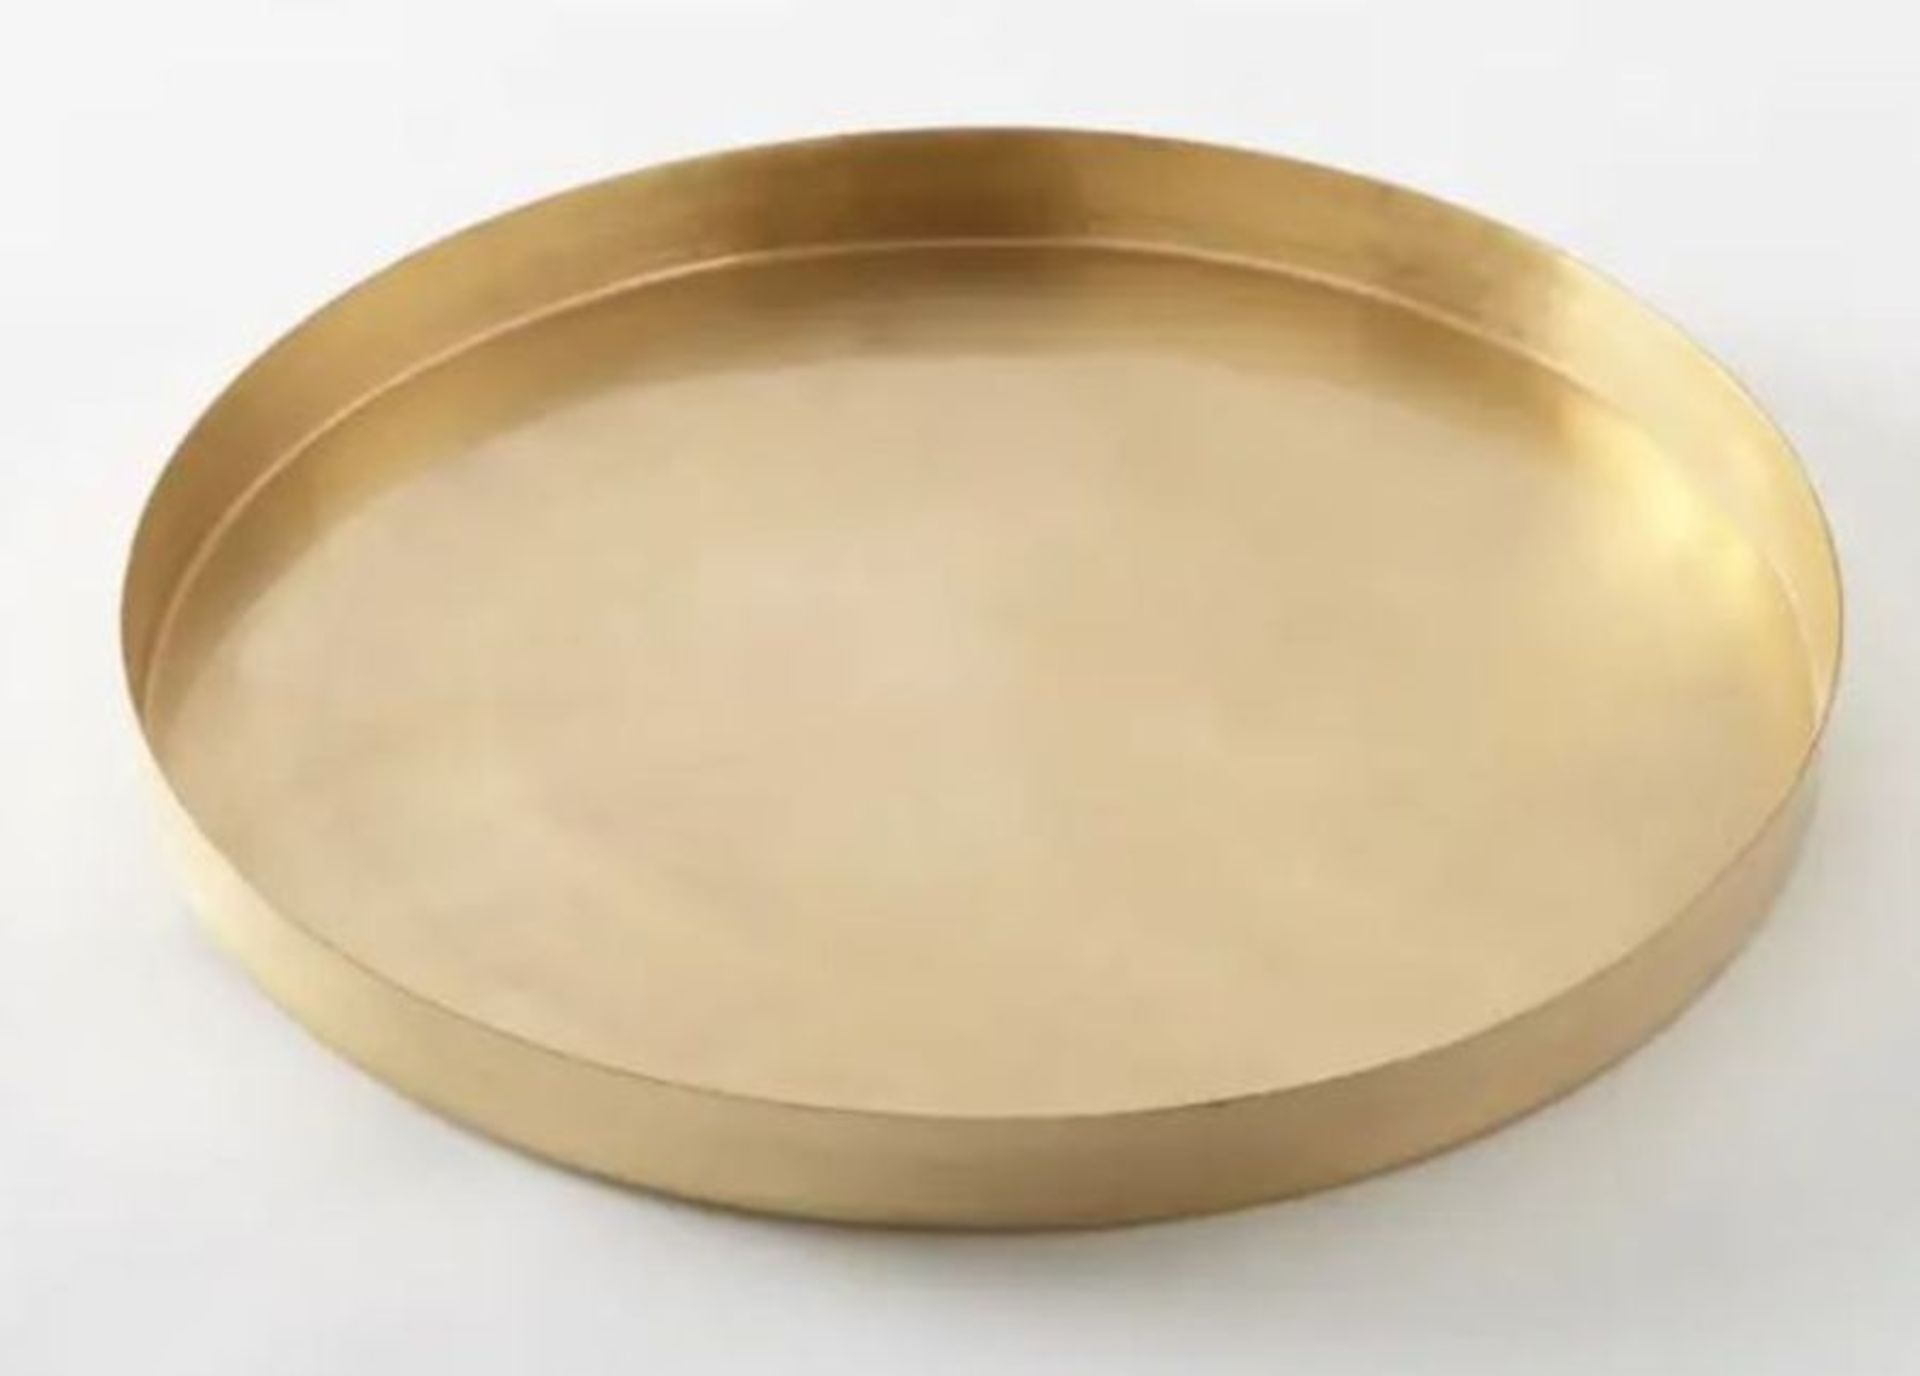 1 X SOLADOR ROUND GOLD METAL TRAY ( MINOR SCUFFS TO TRAY SURFACE) / GRADE B / RRP £50.00